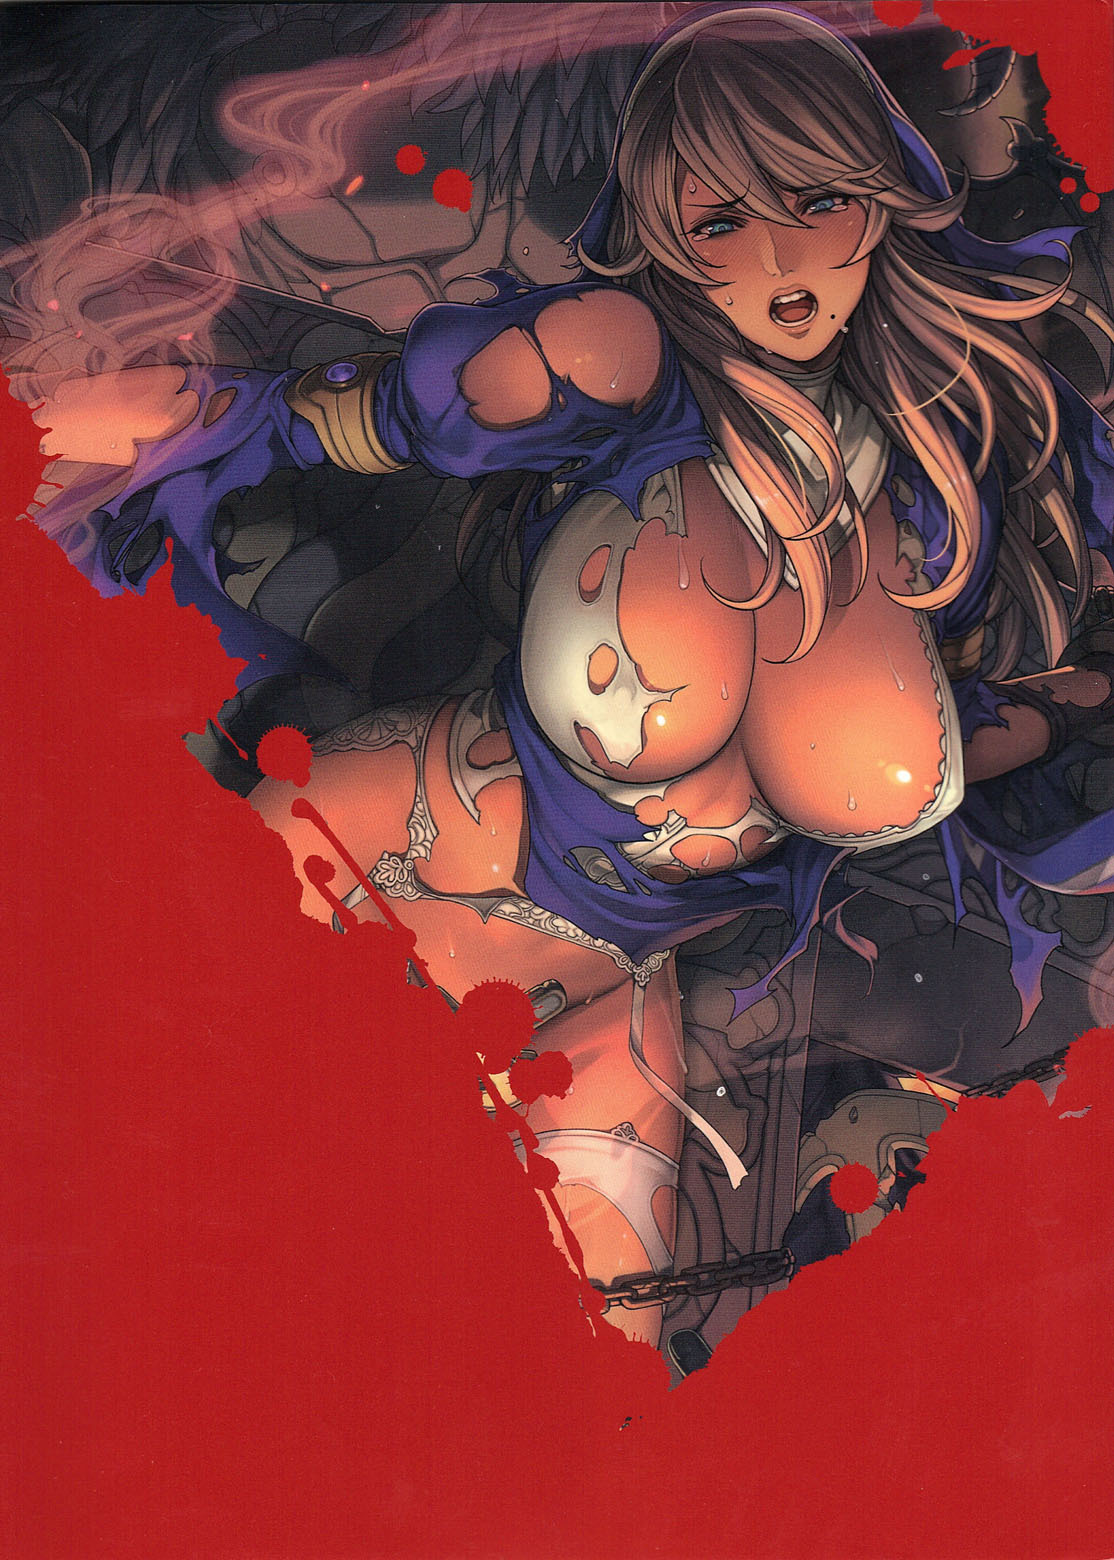 [Hobby JAPAN (Various)] Queen's Blade Kanzen Haiboku Gashuu Vanquished Queens 3 (Queen's Blade) [Incomplete] page 29 full